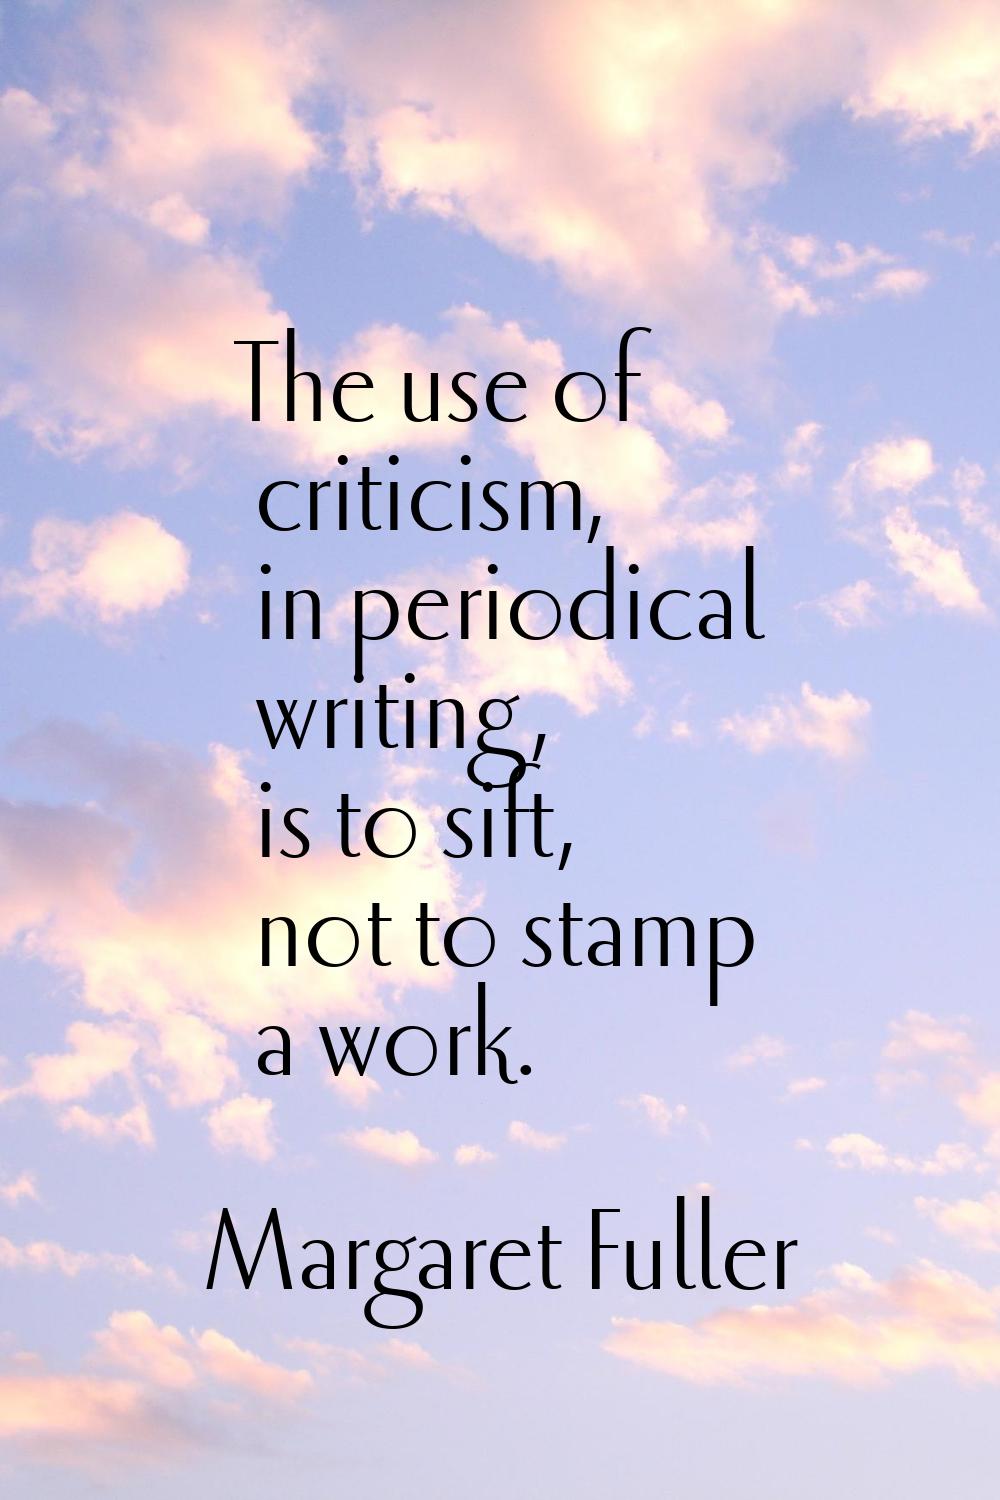 The use of criticism, in periodical writing, is to sift, not to stamp a work.